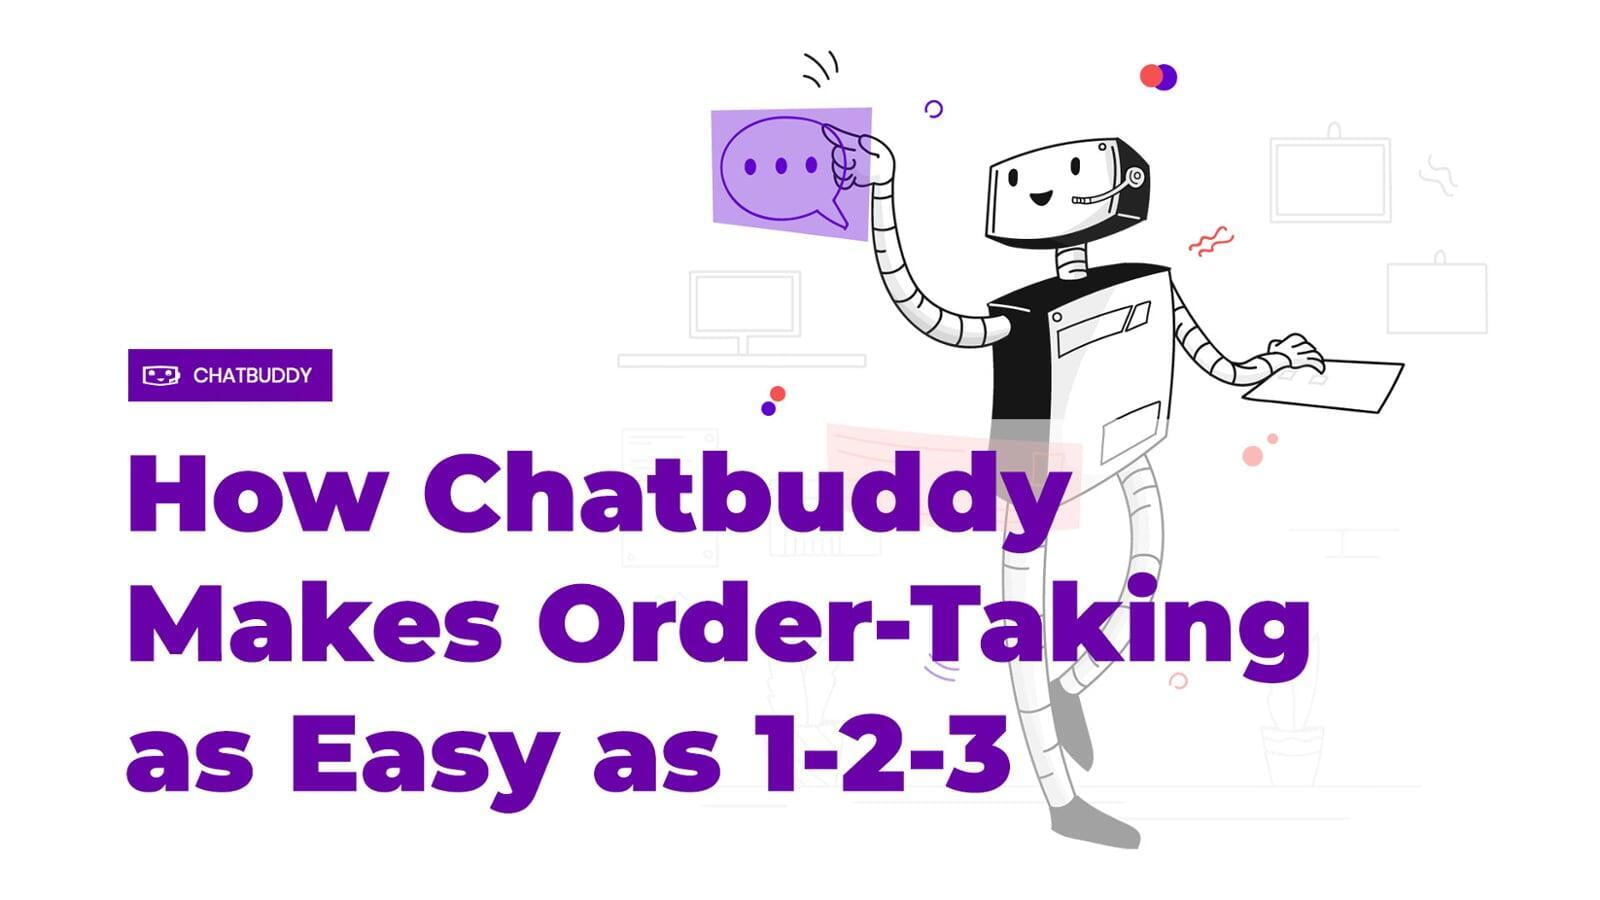 How Chatbuddy Makes Order-Taking as Easy as 1-2-3